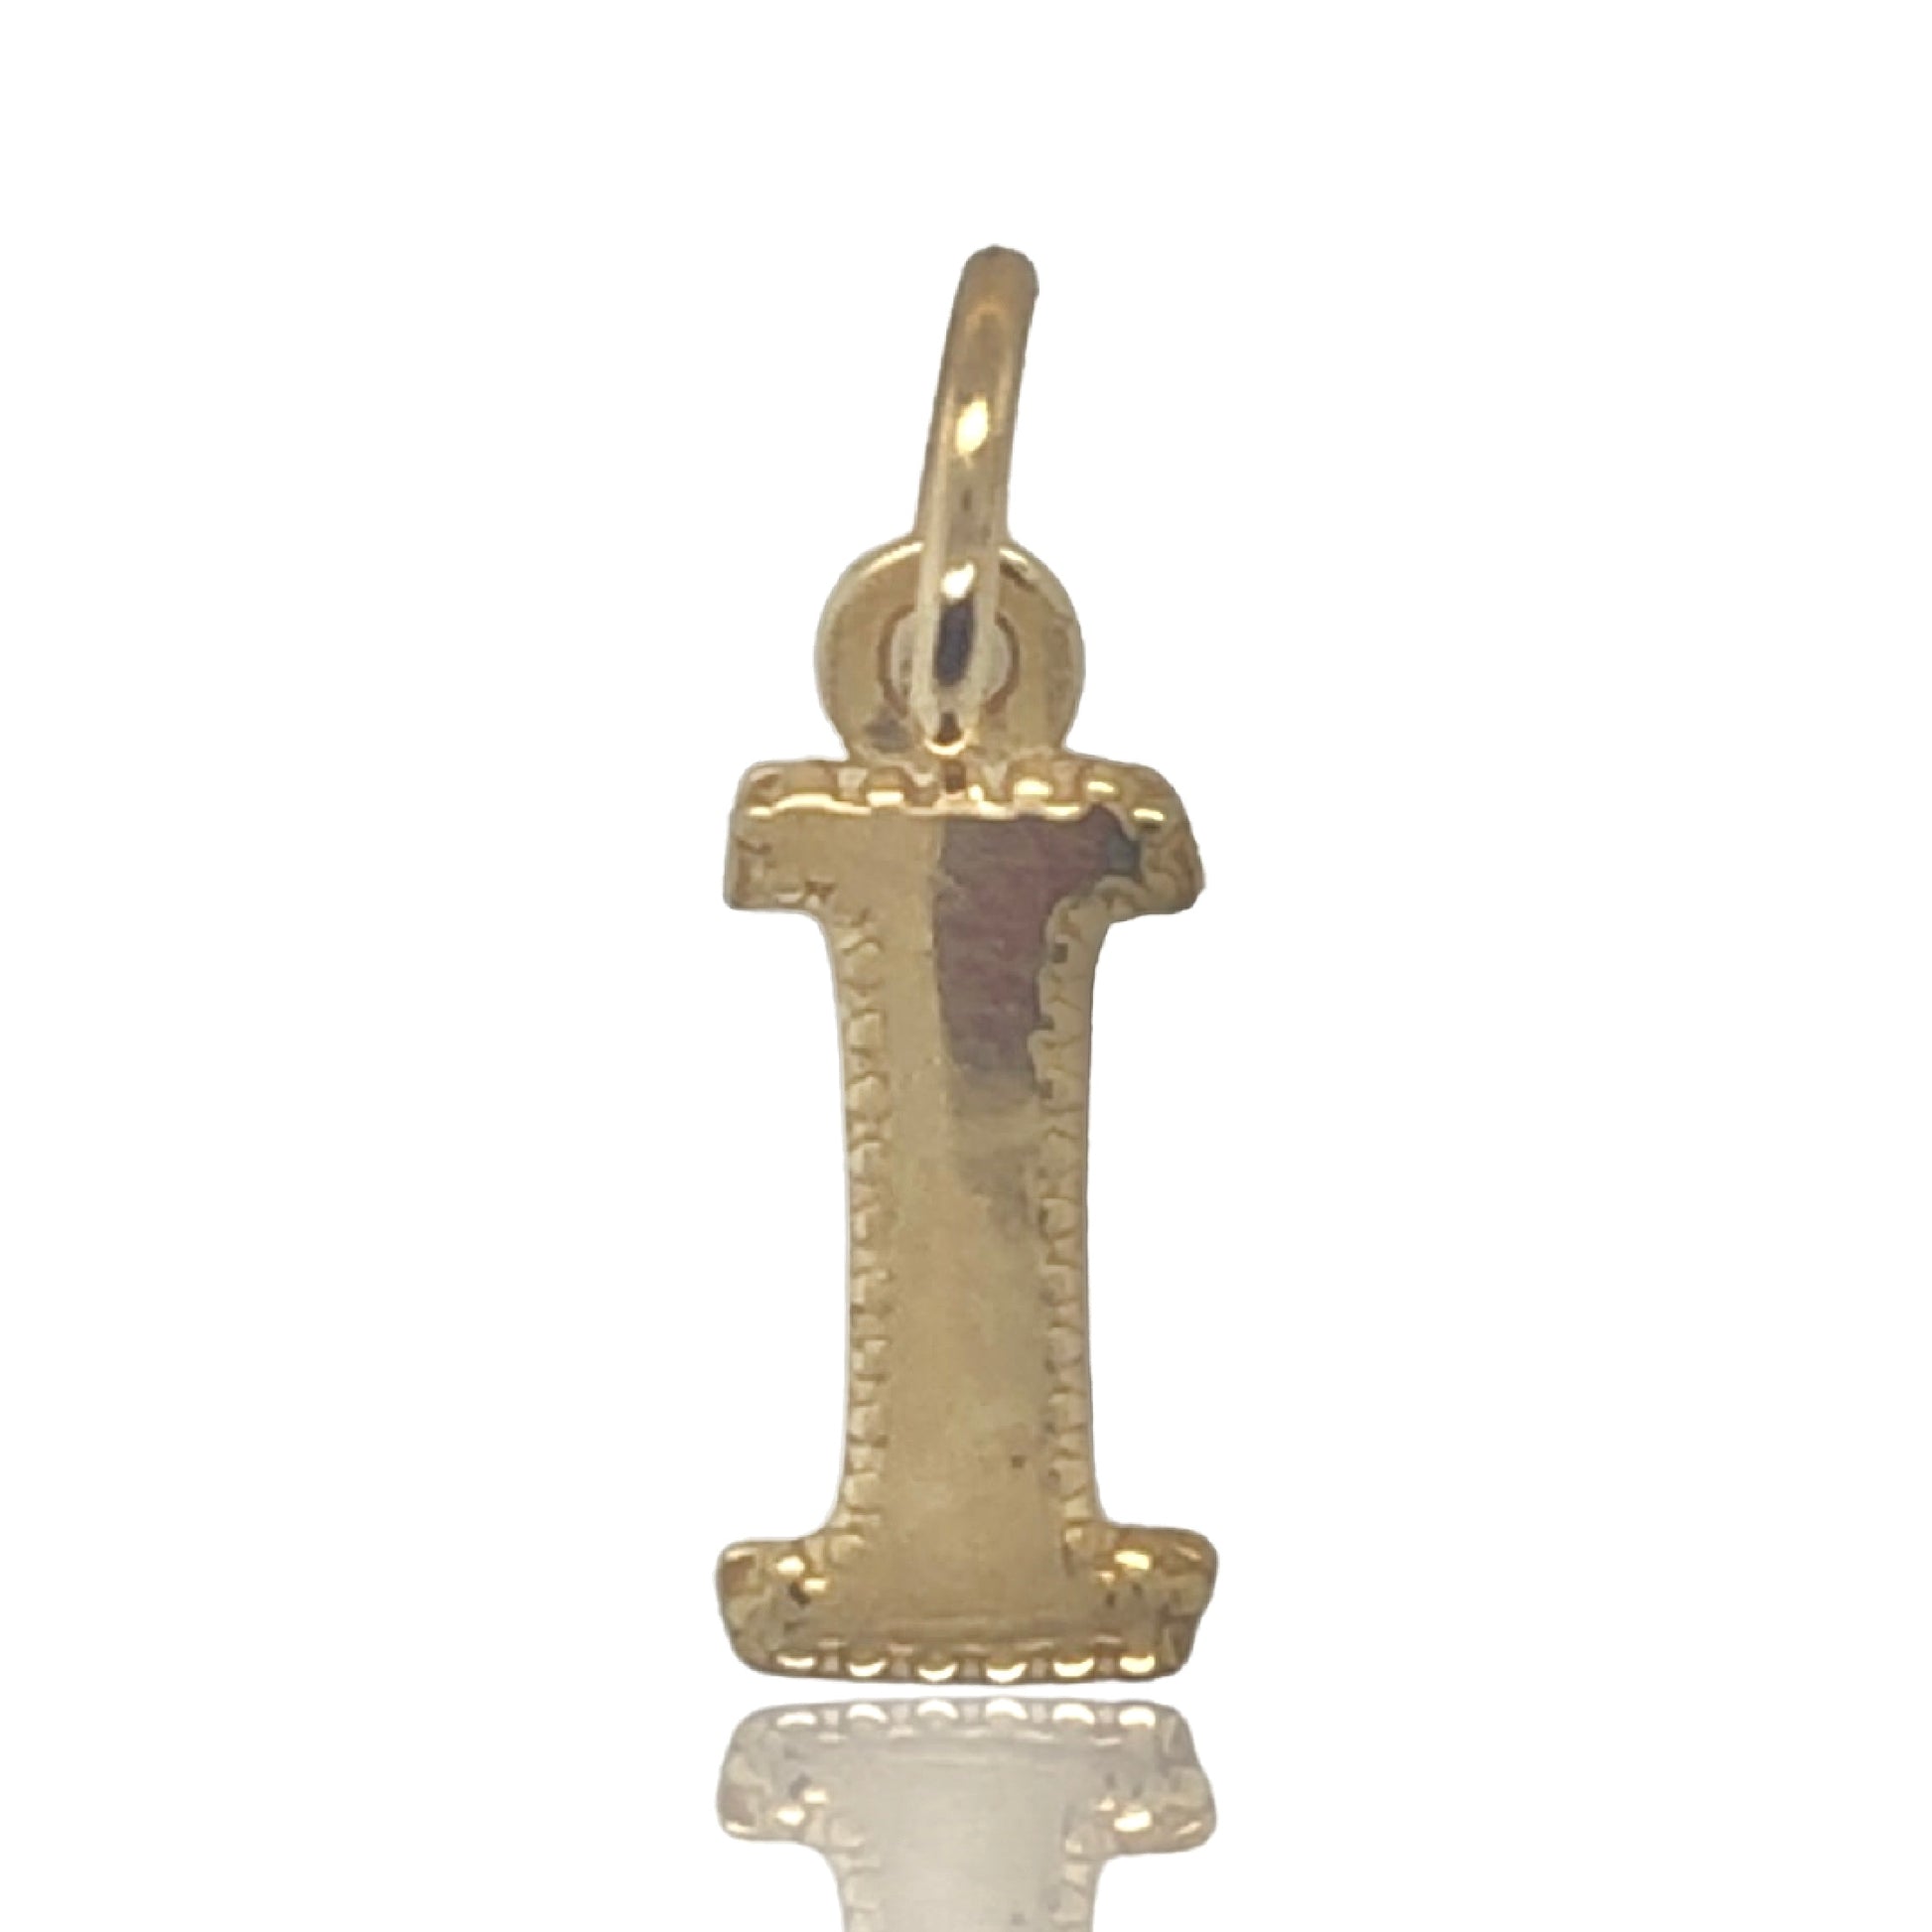 10K Yellow Gold Initial Charm Letter "I"